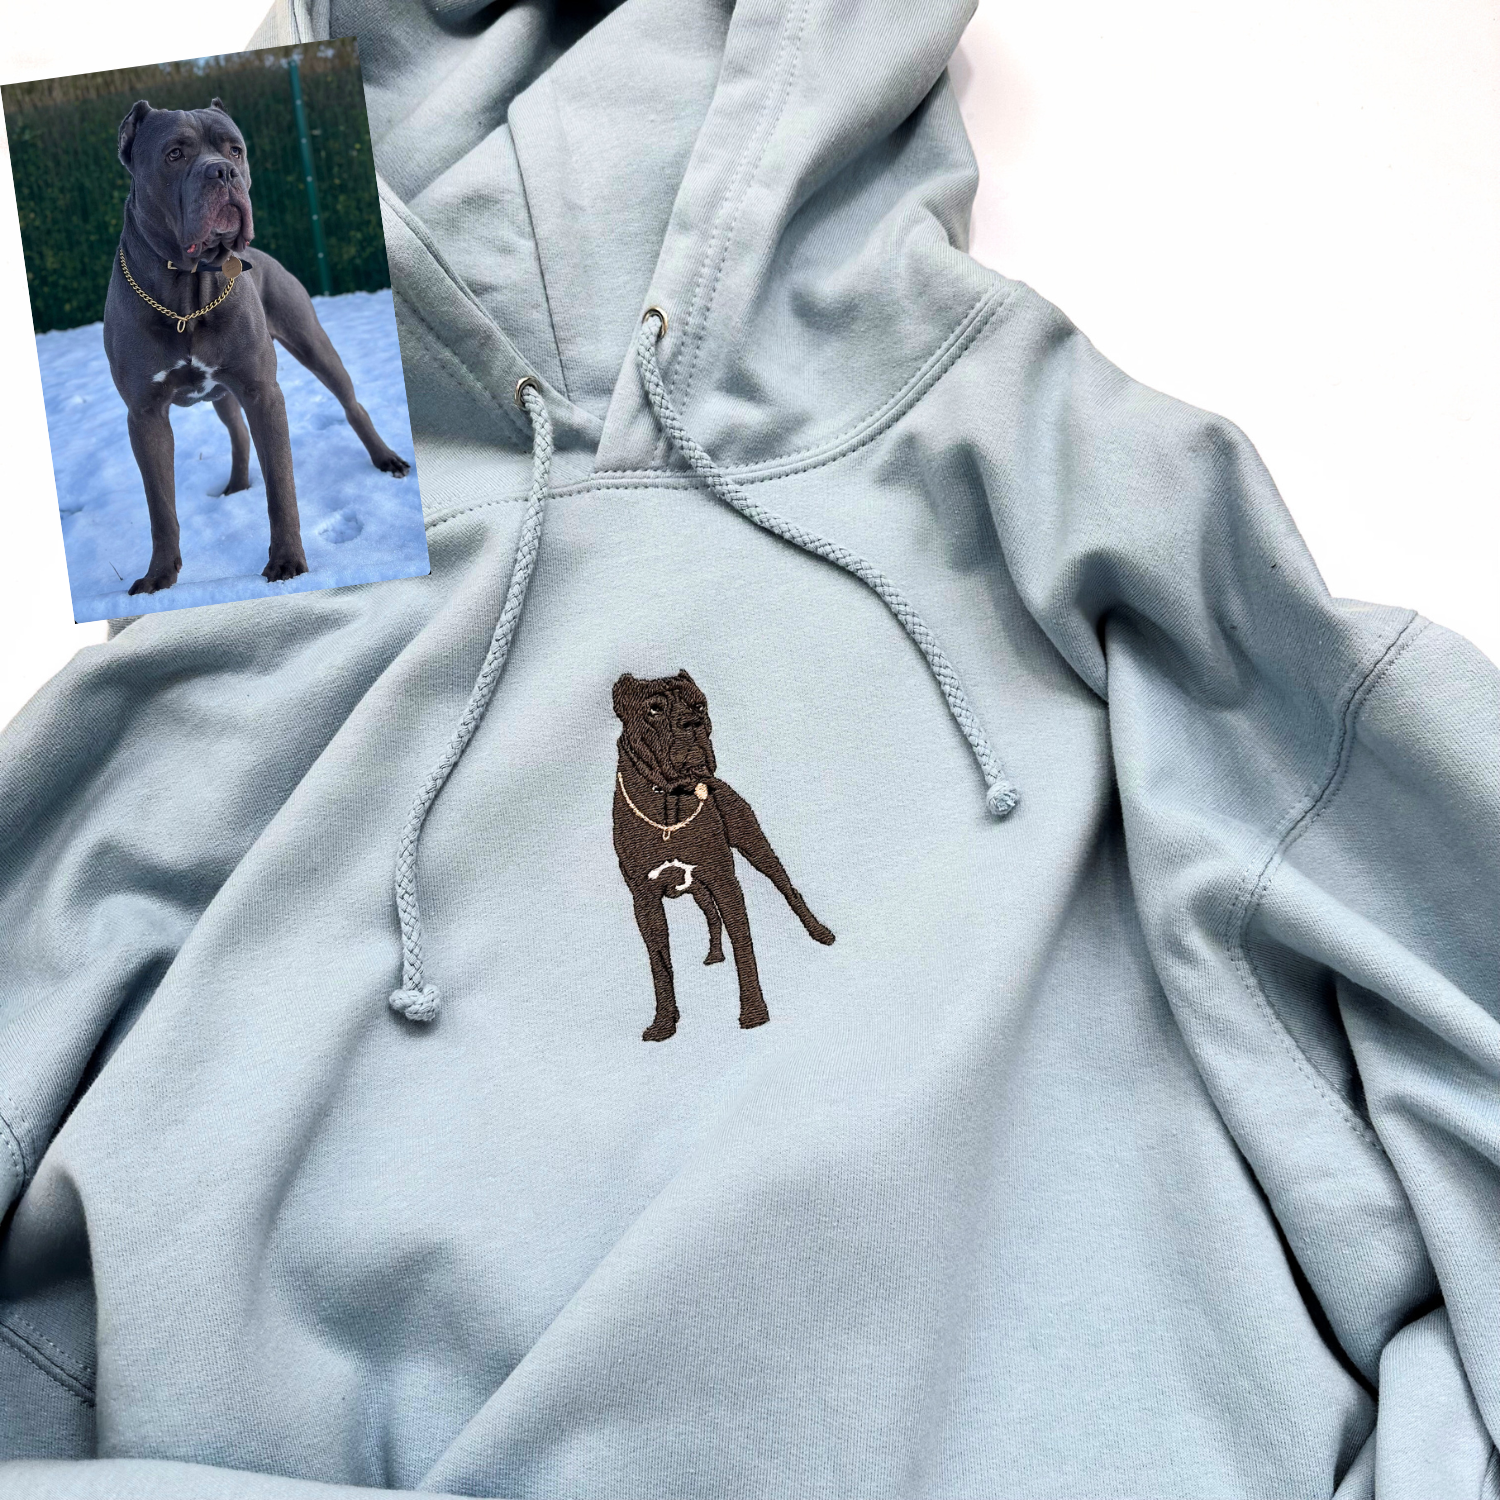 Premium Hoodie with Detailed Embroidered Picture of Your Beloved Pet - Showcase your furry friend's likeness on this high-quality hoodie with exquisite embroidery. Customised to perfection, this premium hoodie features a lifelike depiction of your pet, adding a personal touch to your wardrobe. Perfect for pet lovers, this cosy hoodie combines style and sentimentality in one stunning design. Get ready to wear your pet's adorable image with pride and warmth, wherever you go